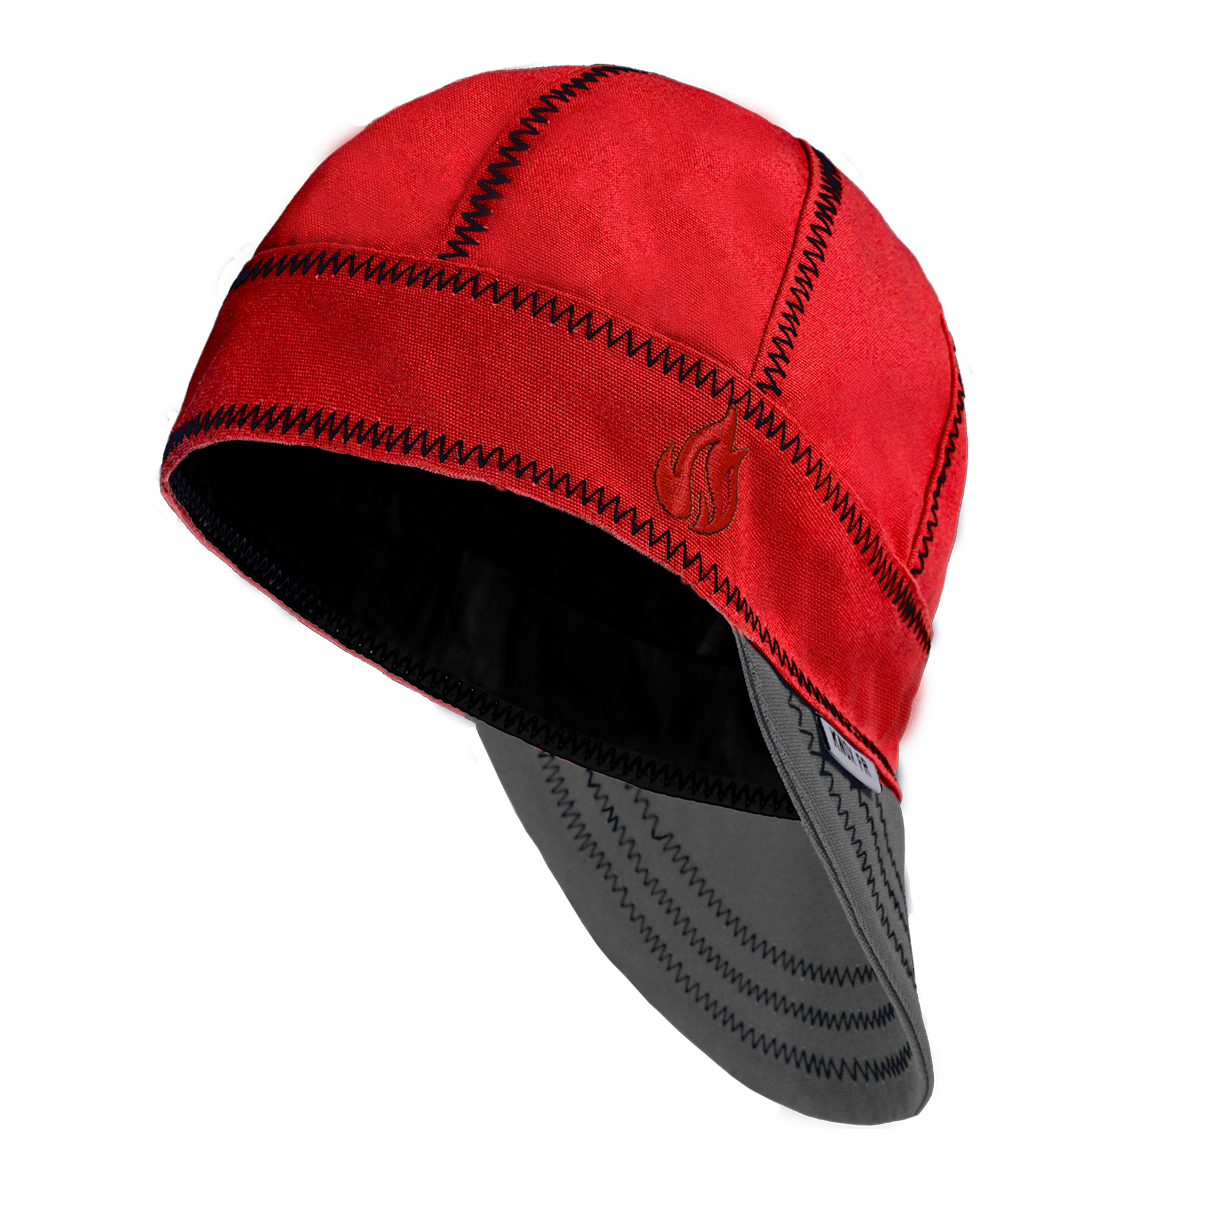 Revco BC5W-BK Welding Cap, Black with Red Flames & Logo